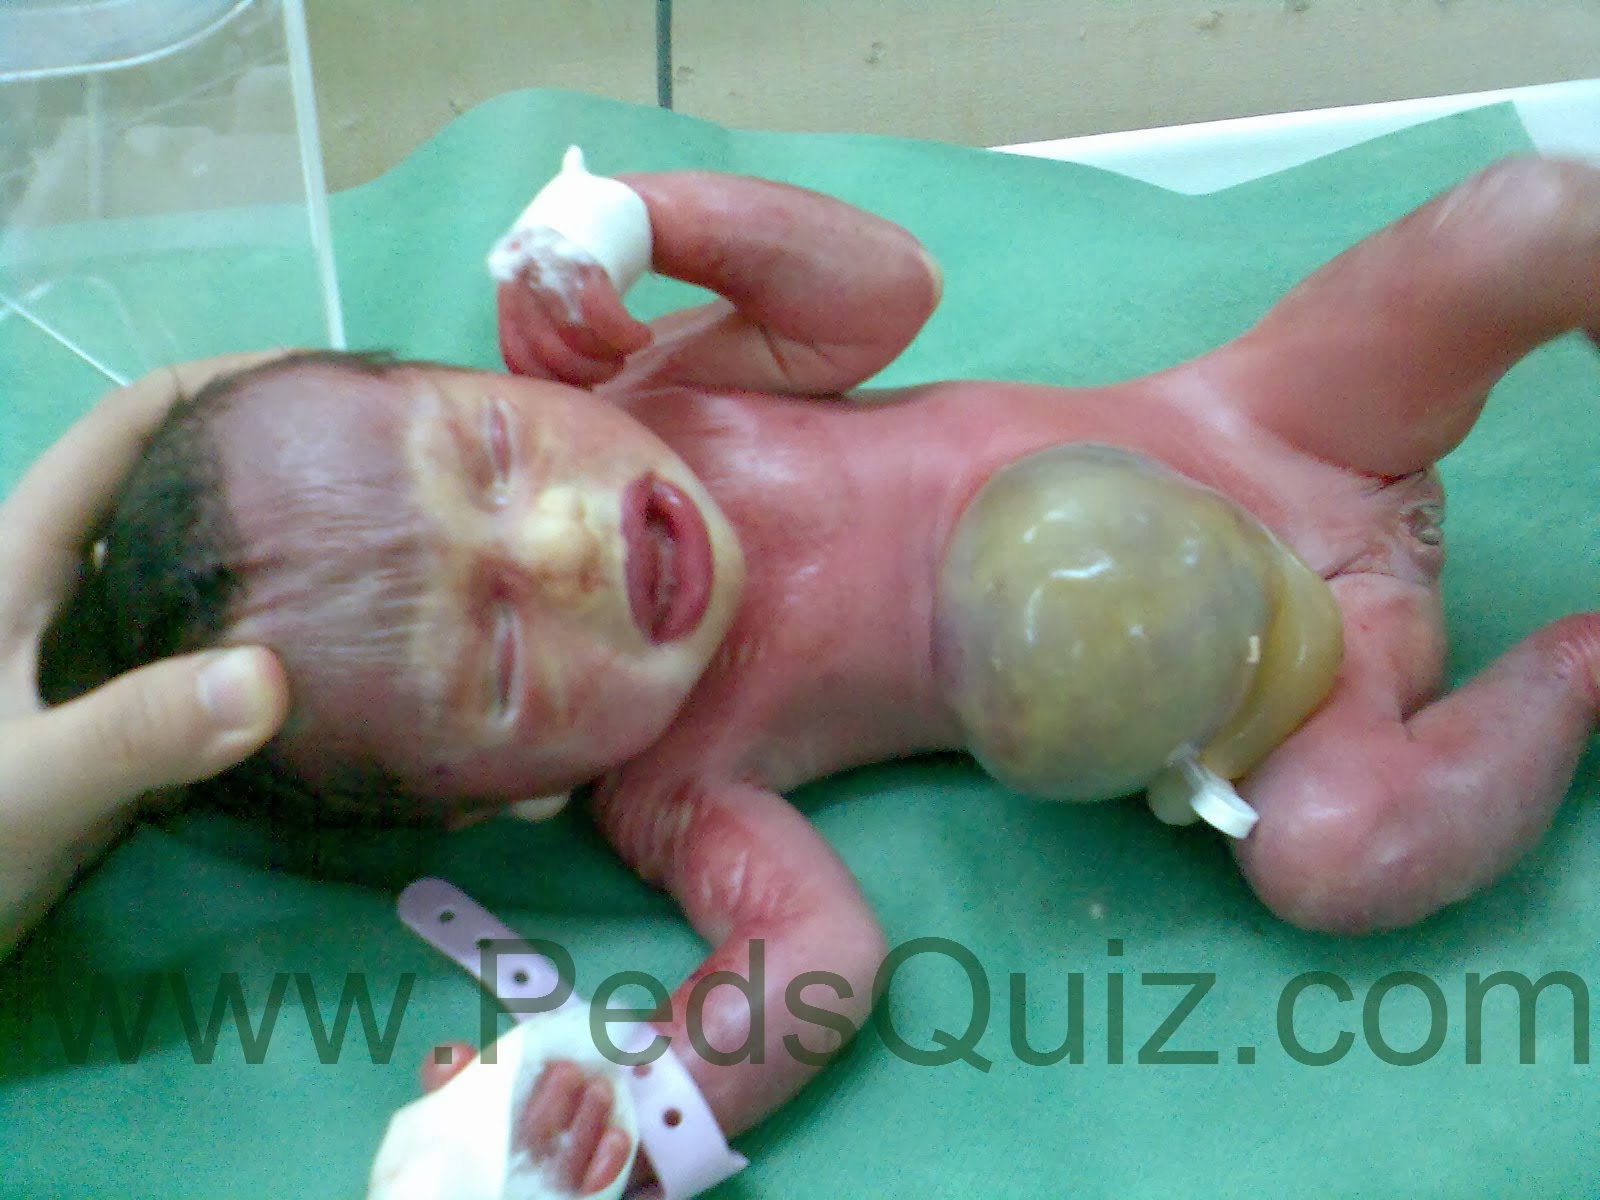 Pediatric Image Quiz A collection of interesting images